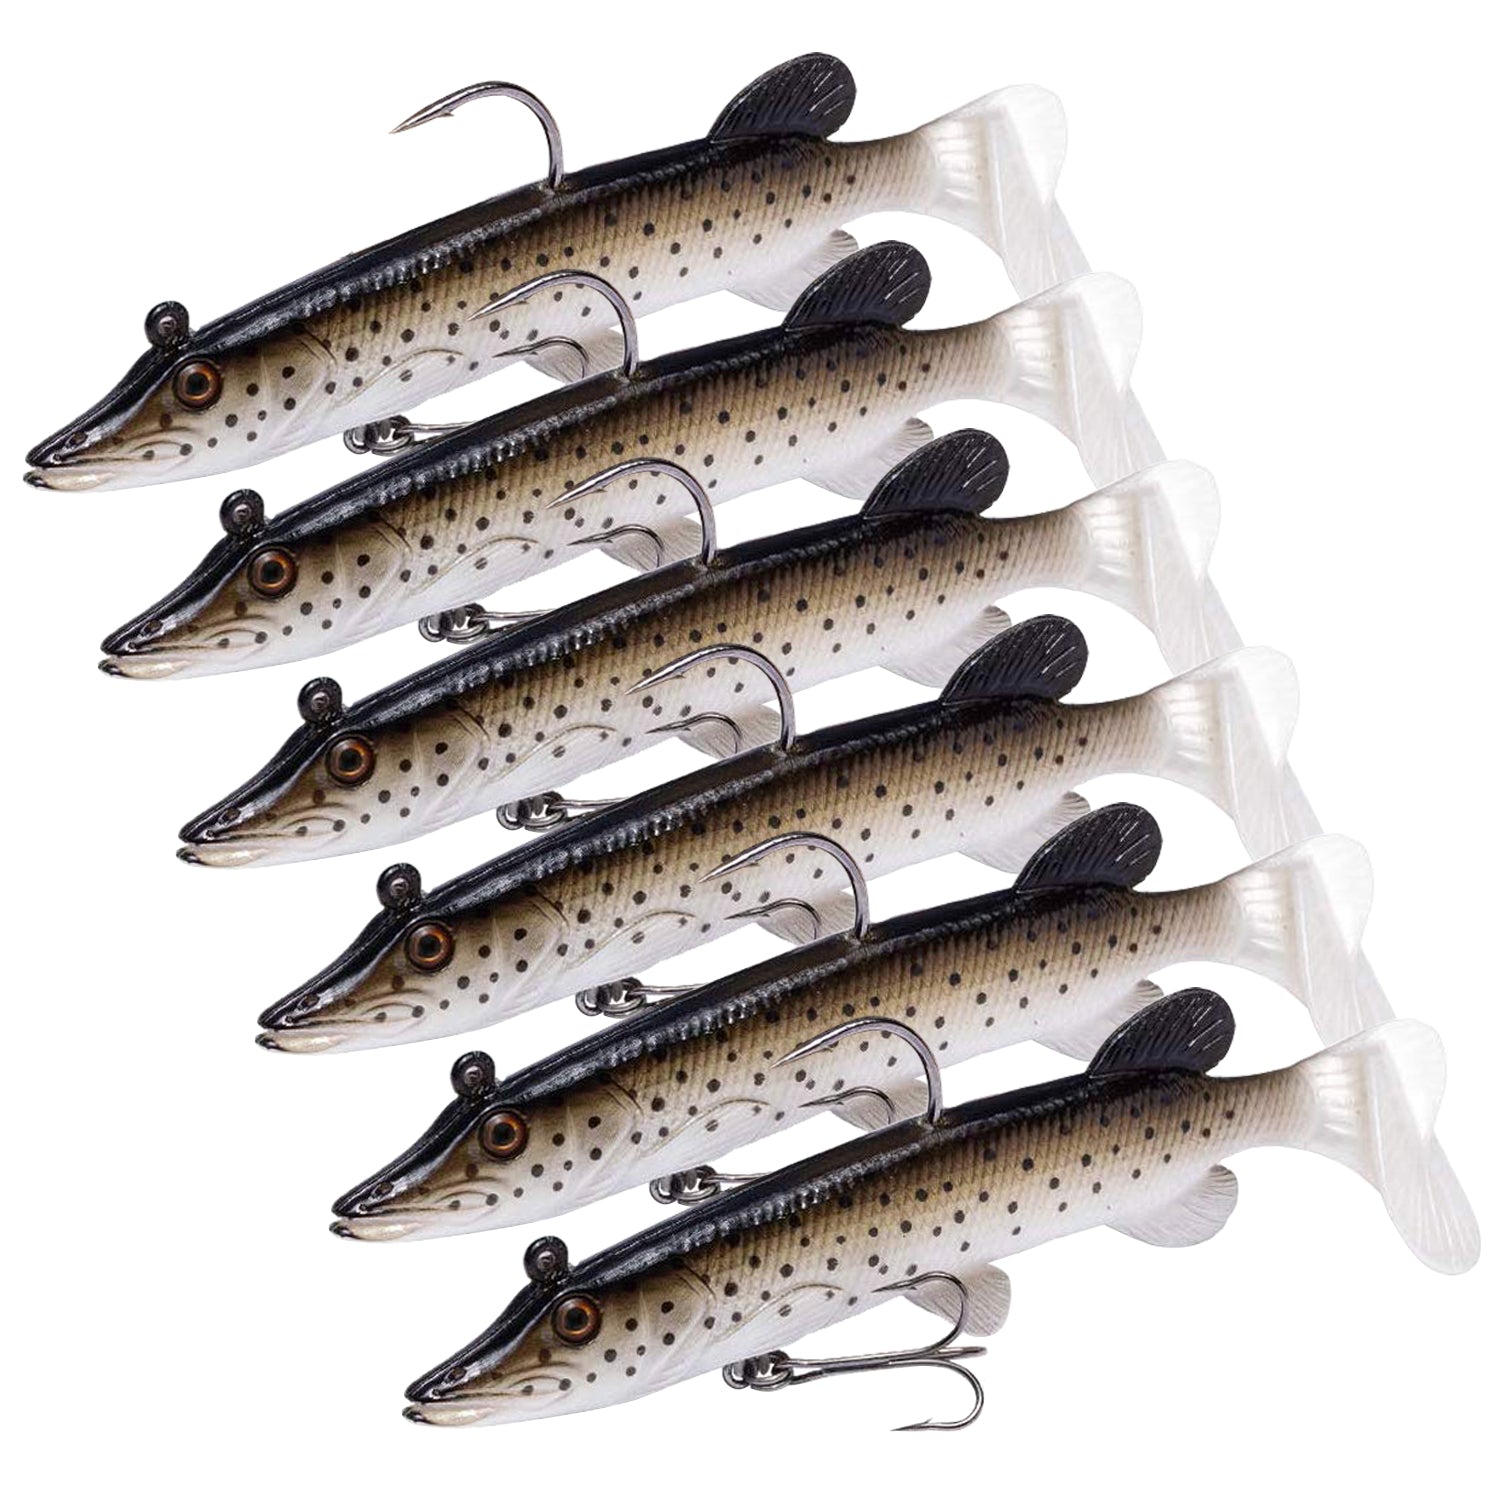  Paddle Tail Swimbaits, Soft Plastic Lures For Bass